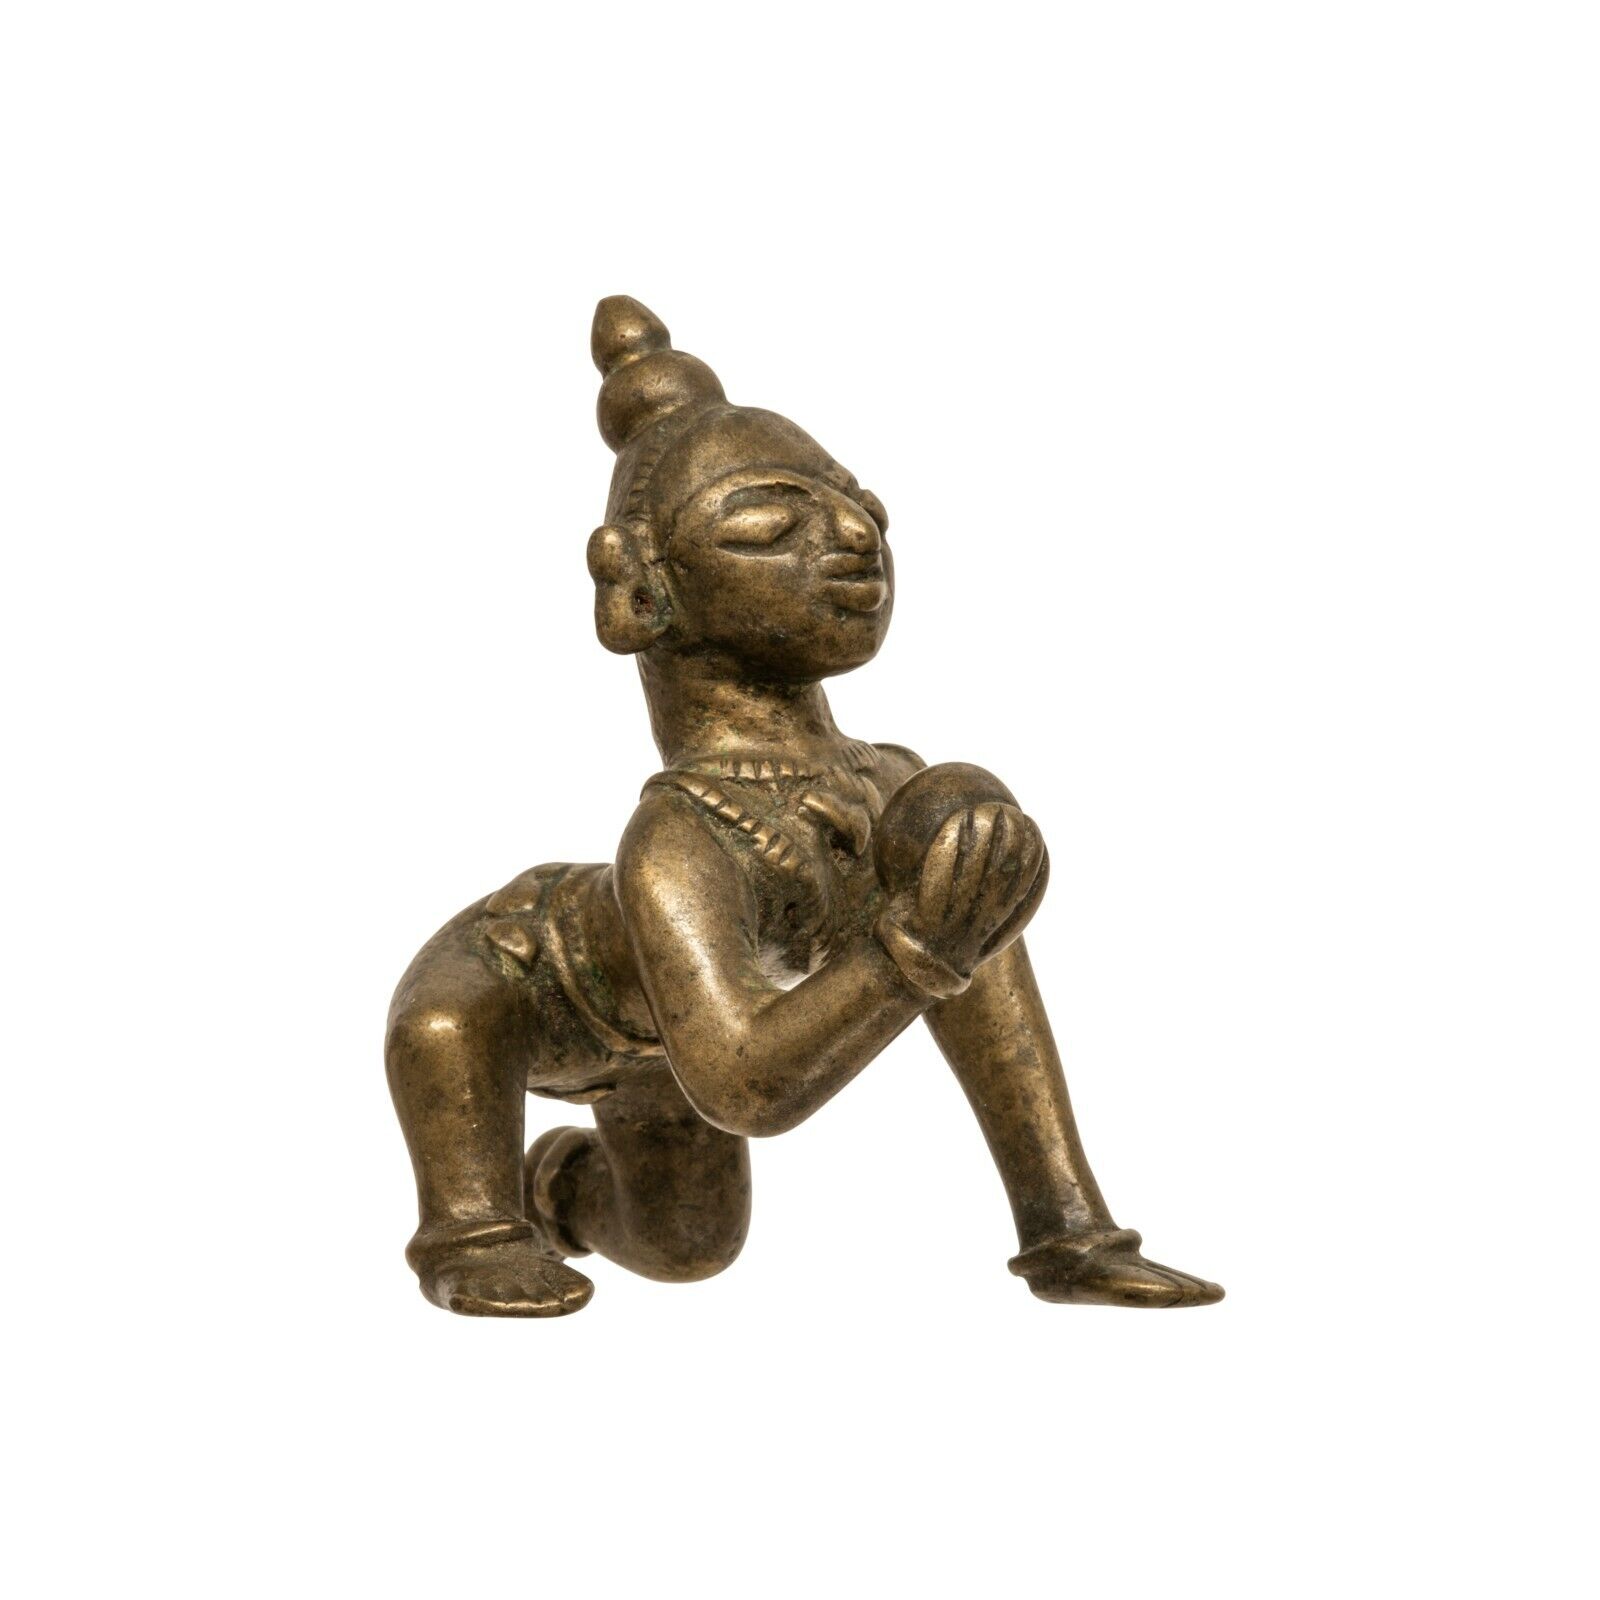 A South Indian Copper Alloy Sculpture Of Balakrishna 19th Century